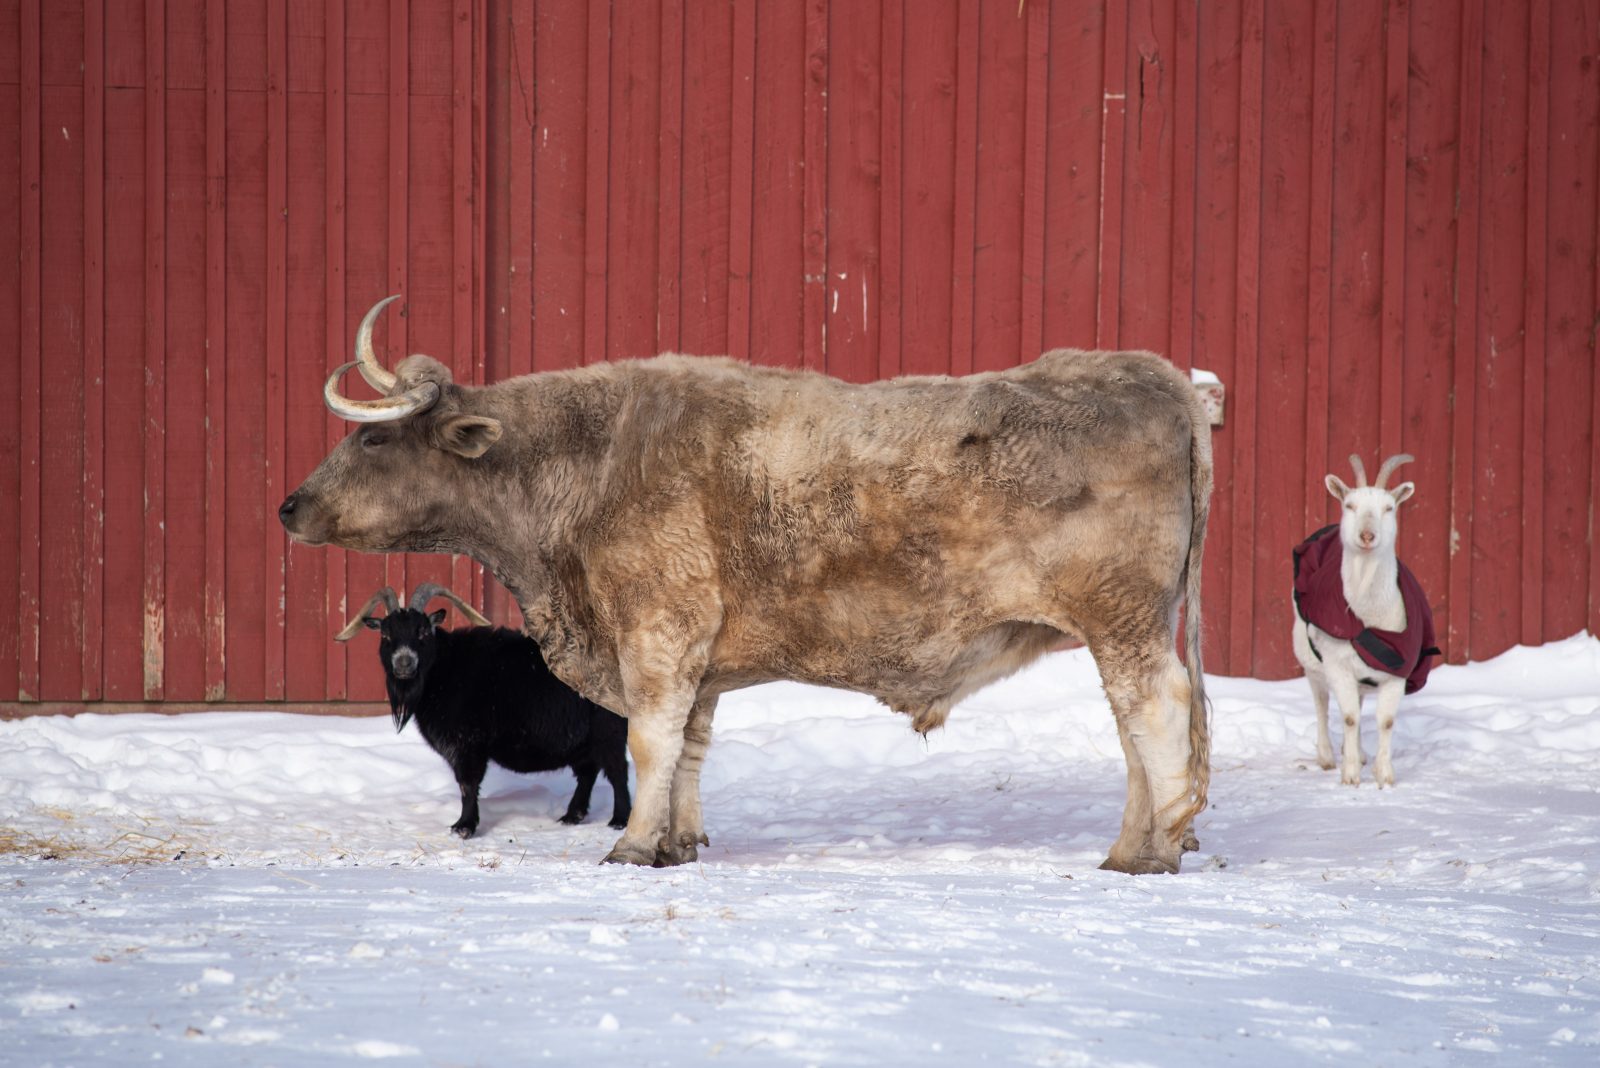 Wilson goat and Isaac steer in the snow at Farm Sanctuary